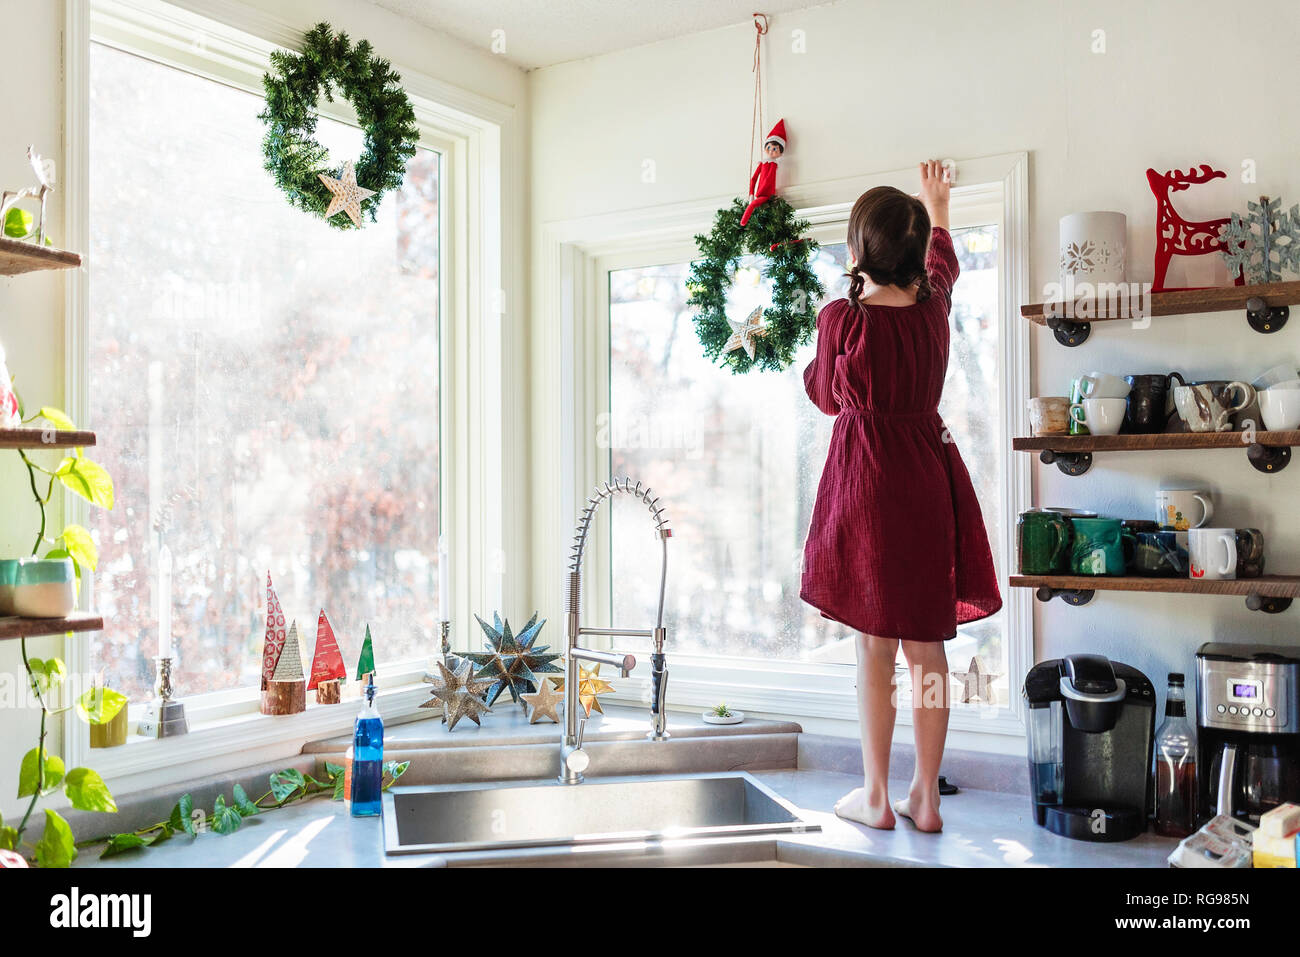 Girl standing on a kitchen worktop putting up  Christmas decorations Stock Photo